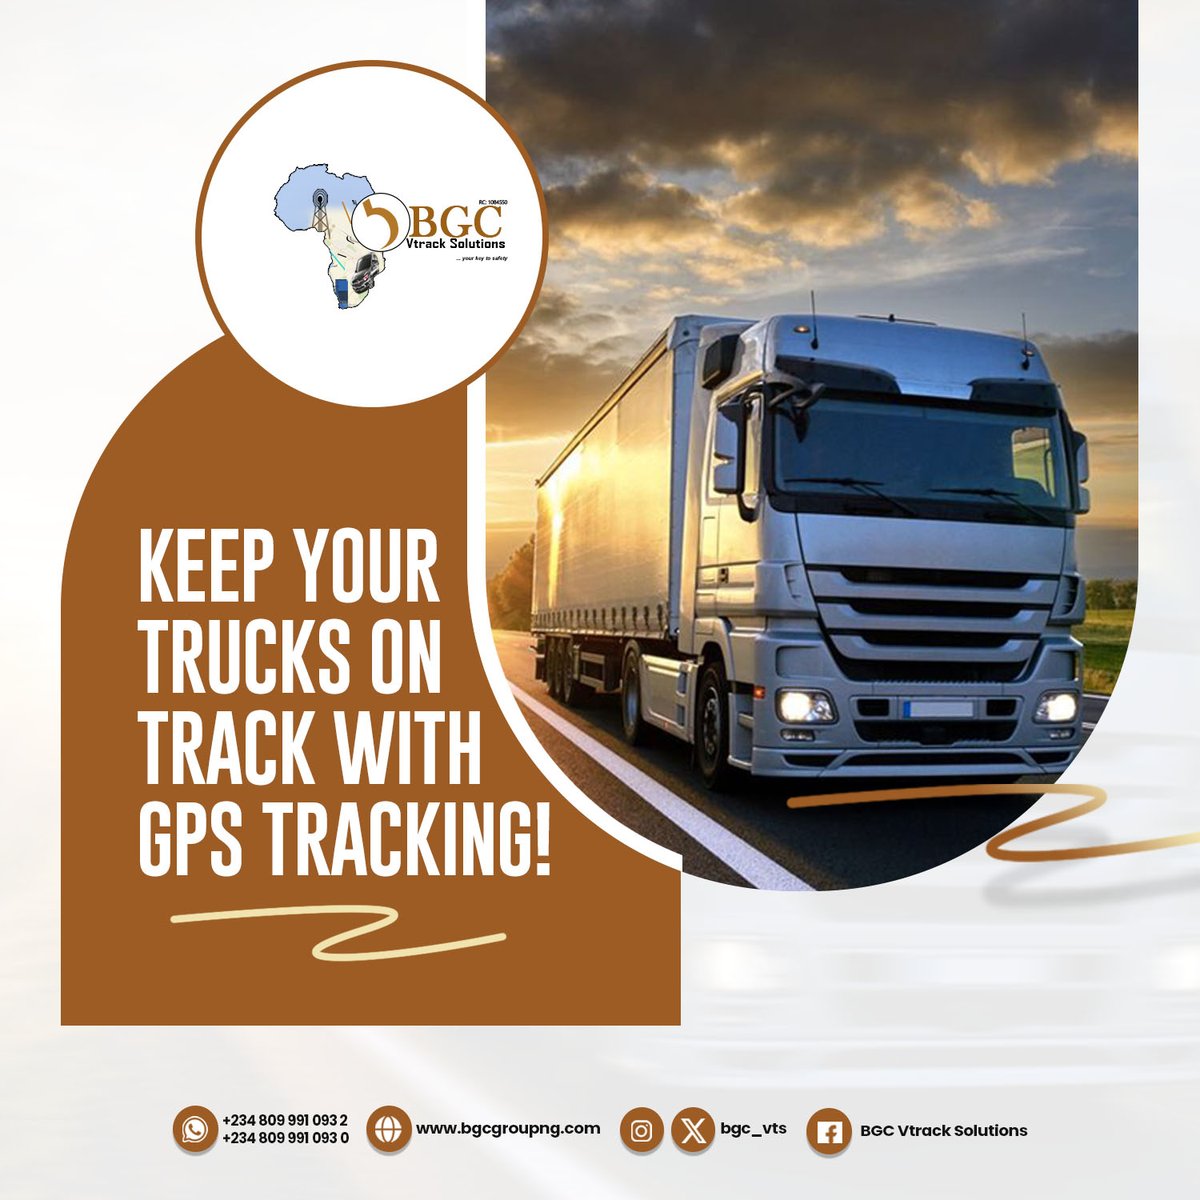 Keep your trucks on track with our GPS tracking! 📍✨ From monitoring routes to ensuring timely deliveries, our GPS solutions help you stay ahead any theft event.

 #TSTTPD #truck #trucks #trucksofinstagram #truckdelivery #truckdriver #drivertruck #drive #tracktruck